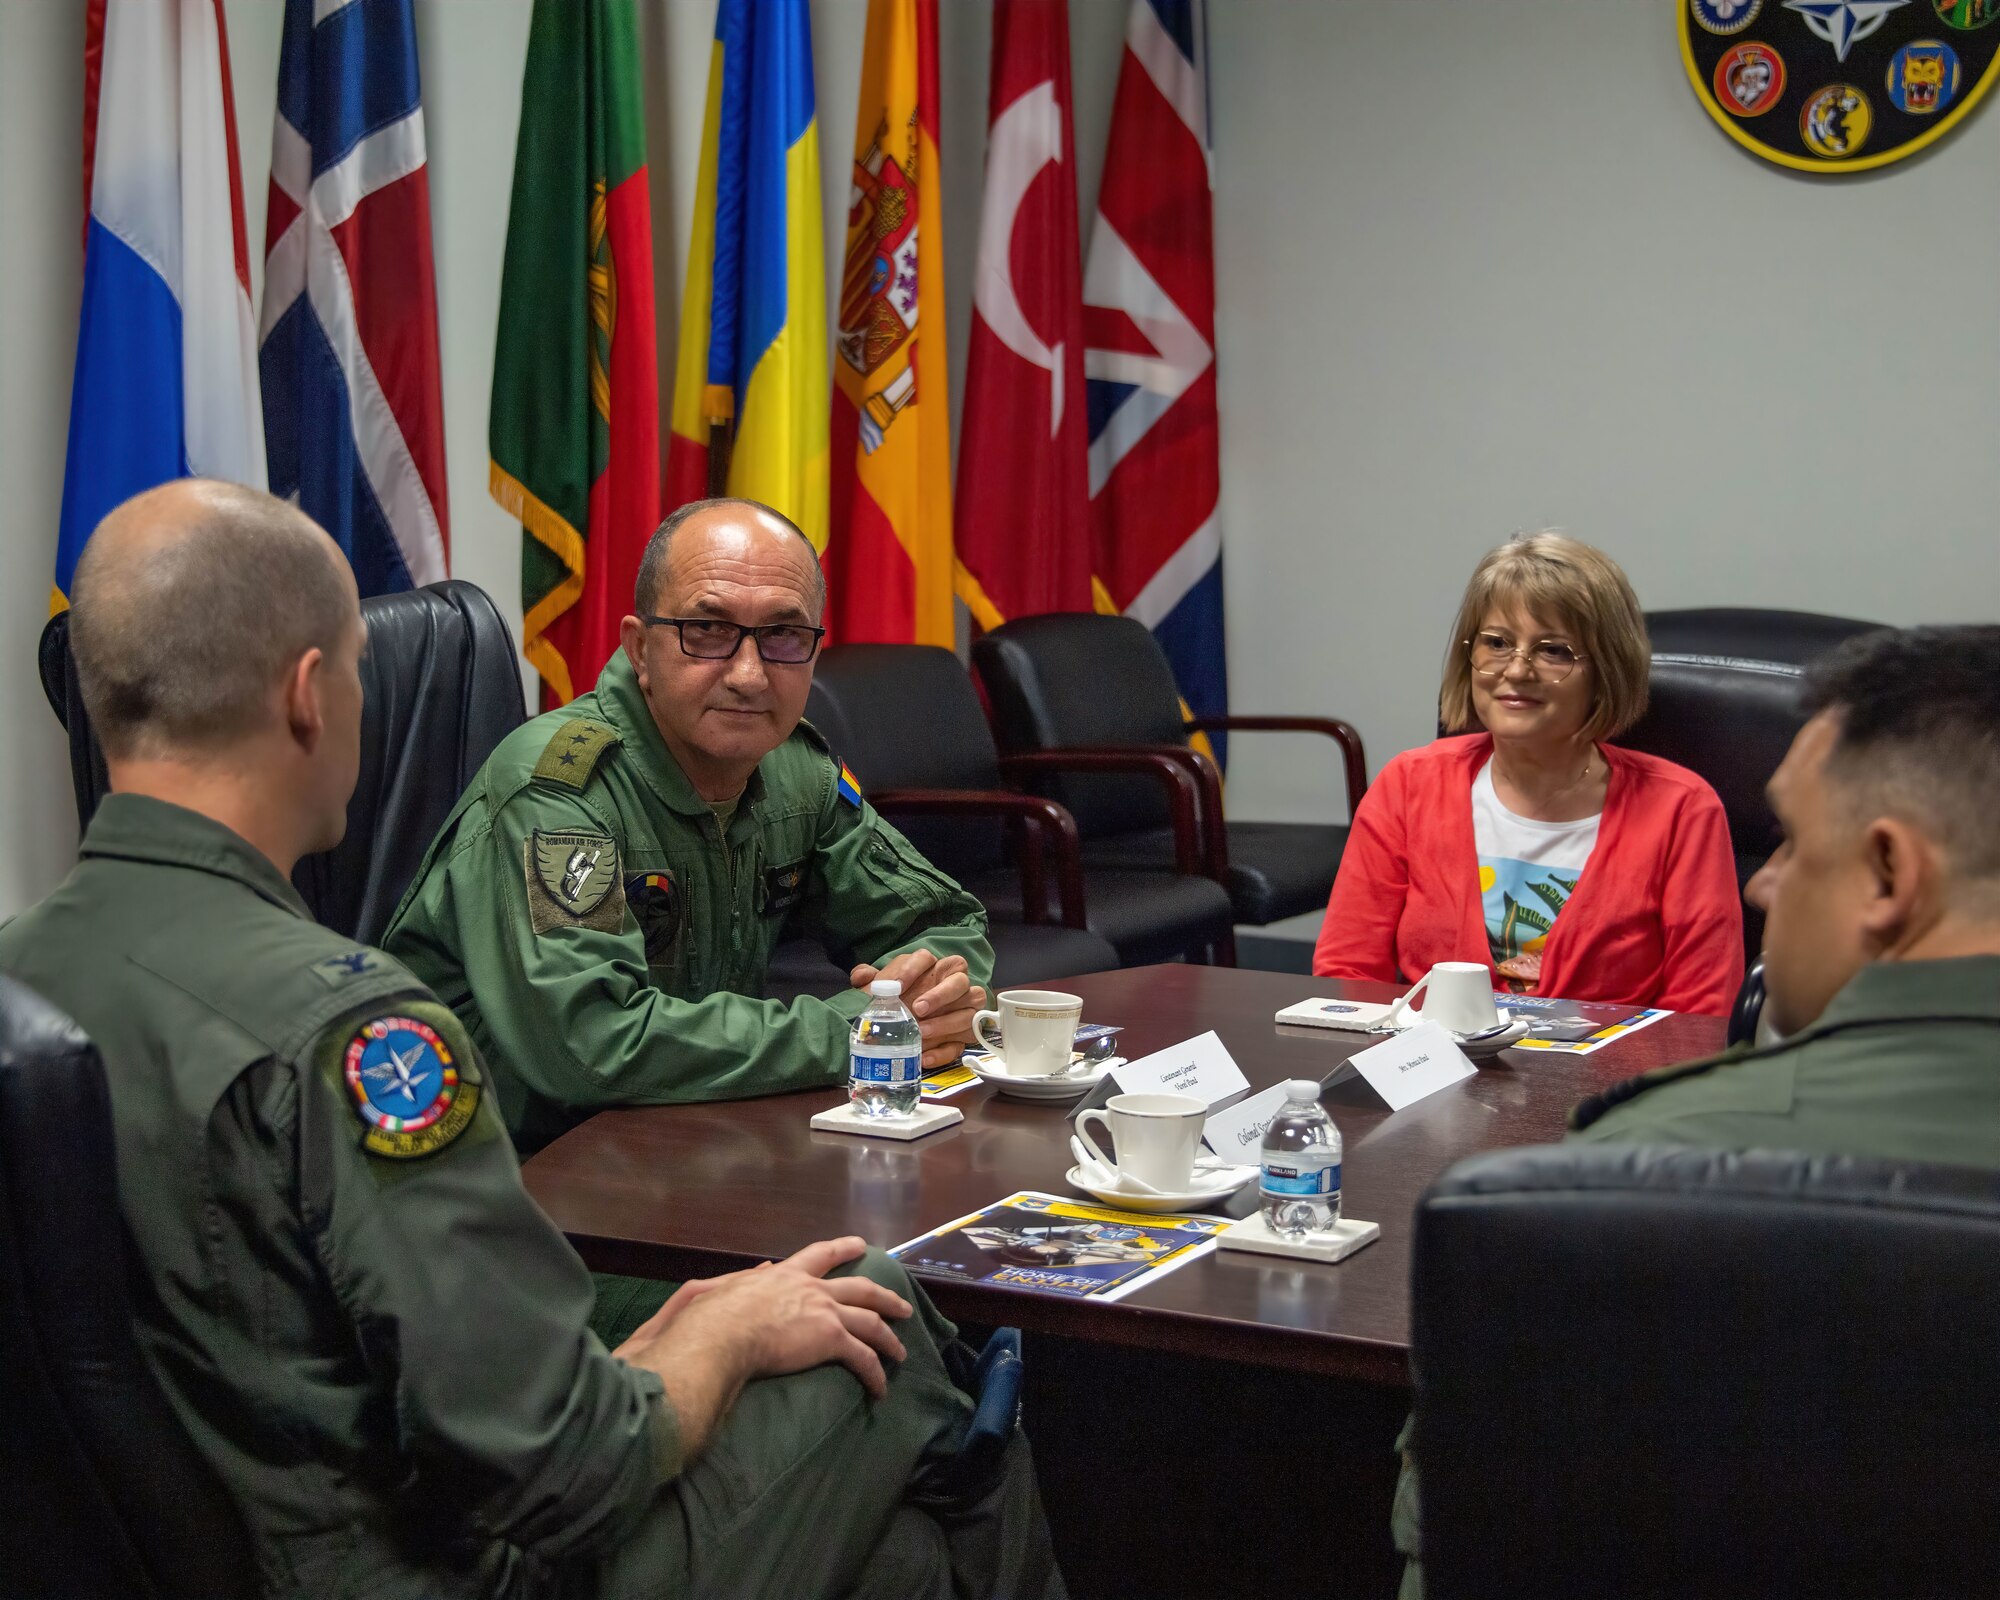 Chief of the Romanian Air Staff Lt. Gen. Viorel Pană and Mrs. Monica Pană meet with Col. Scott Gunn, Vice Commander of the 80th Flying Training Wing and Euro-NATO Joint Jet Pilot Training (ENJJPT), at Sheppard Air Force Base, Texas, June 29, 2023. Romania has been a member of ENJJPT since 2017 and the Romanian Air Force began training its first pilots there in May of 2019. (U.S. Air Force Photo by 1st Lt. Daniel Lindstrom)